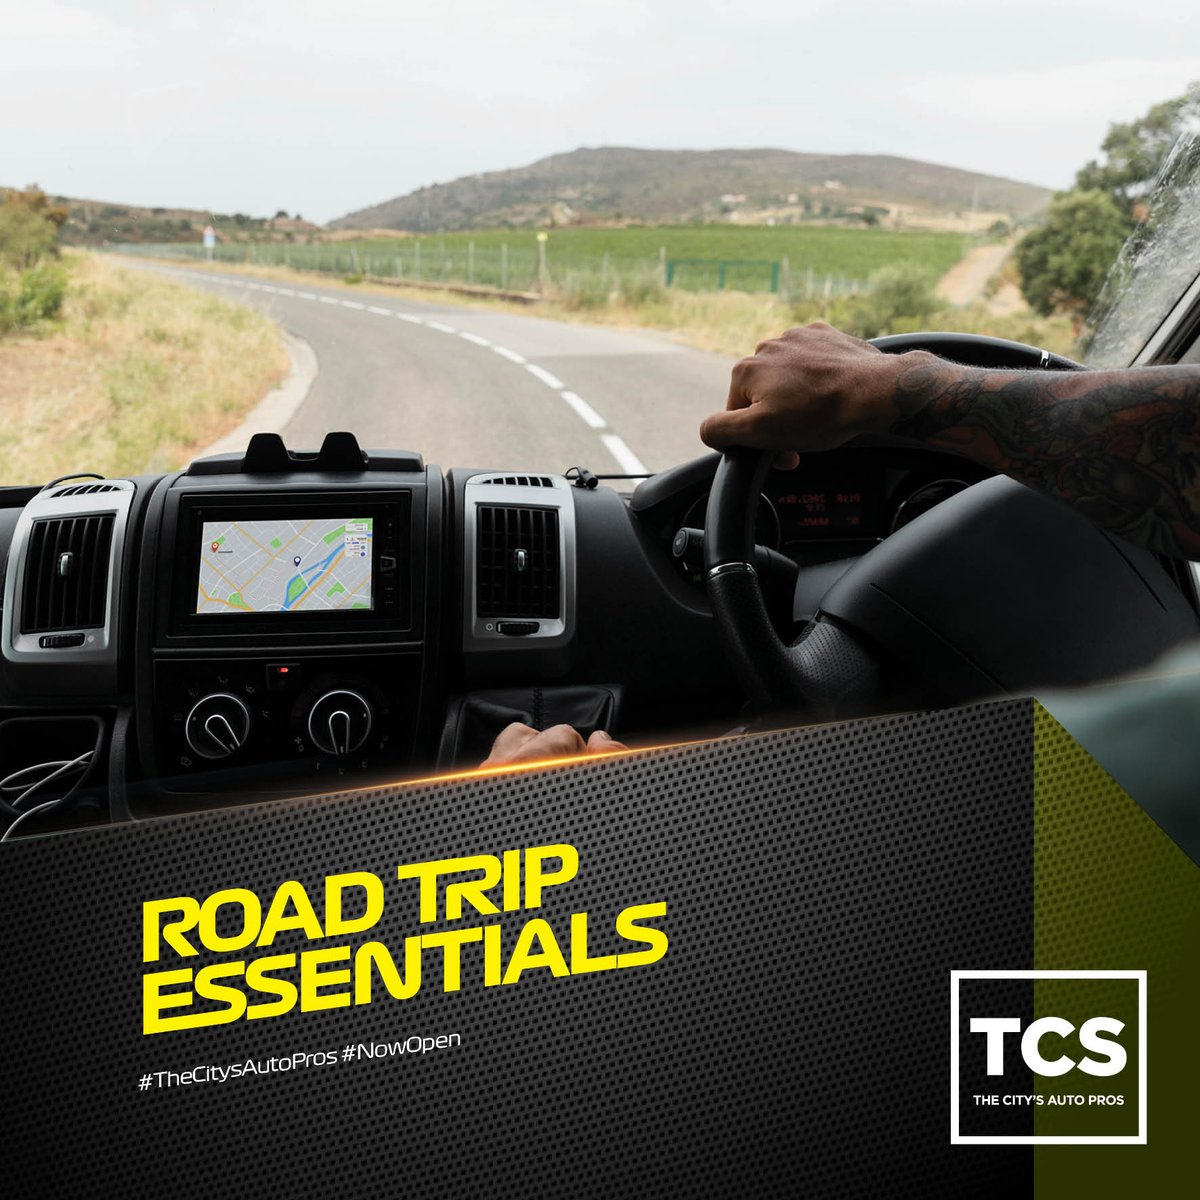 So, you’re planning for a long road trip. What 10 things are you going to check on your car before your journey? Let’s see how many you can get to in our comments section...let’s go!
#TCS #TheCitysAutoPros #RoadTrip #CarCheckup #CarService #EngineService #TyreChange.